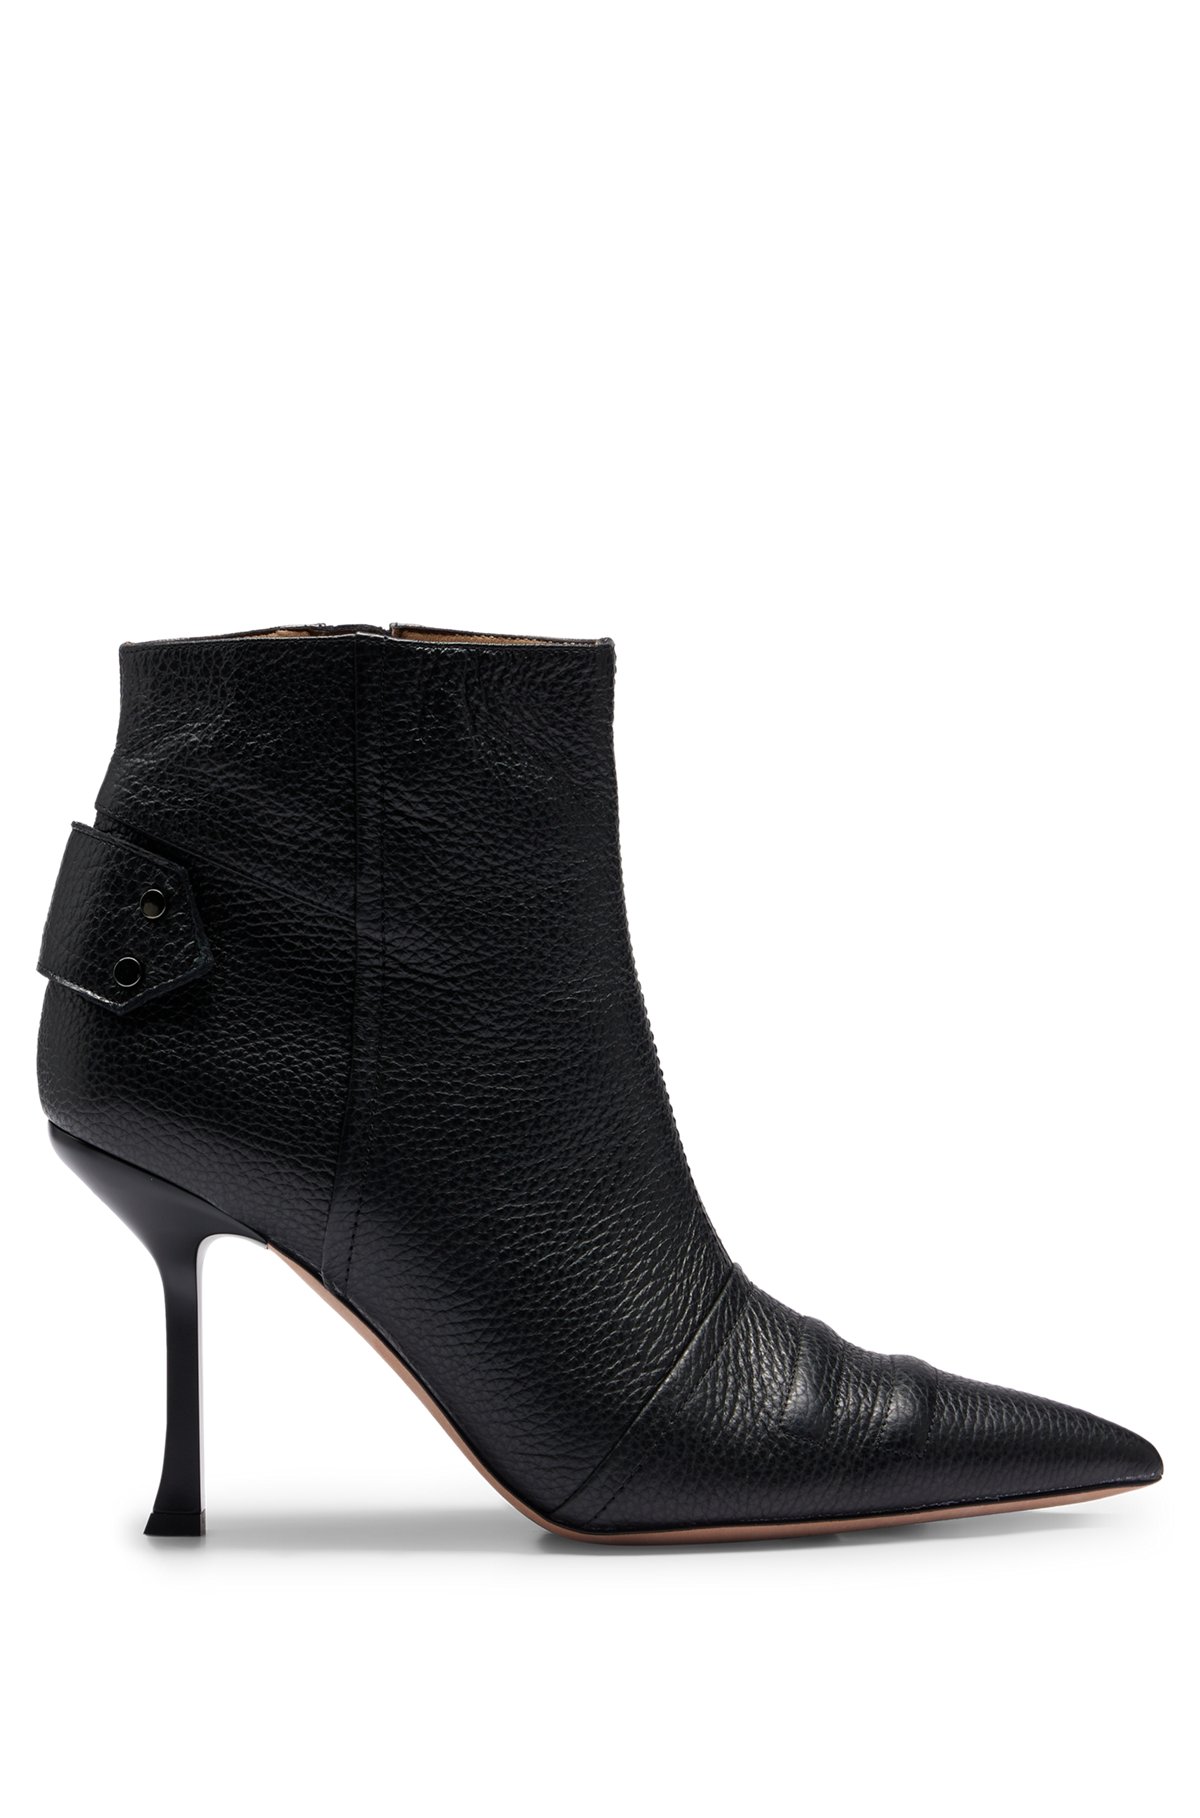 Tumbled-leather boots with 9cm heel and metal trim, Black